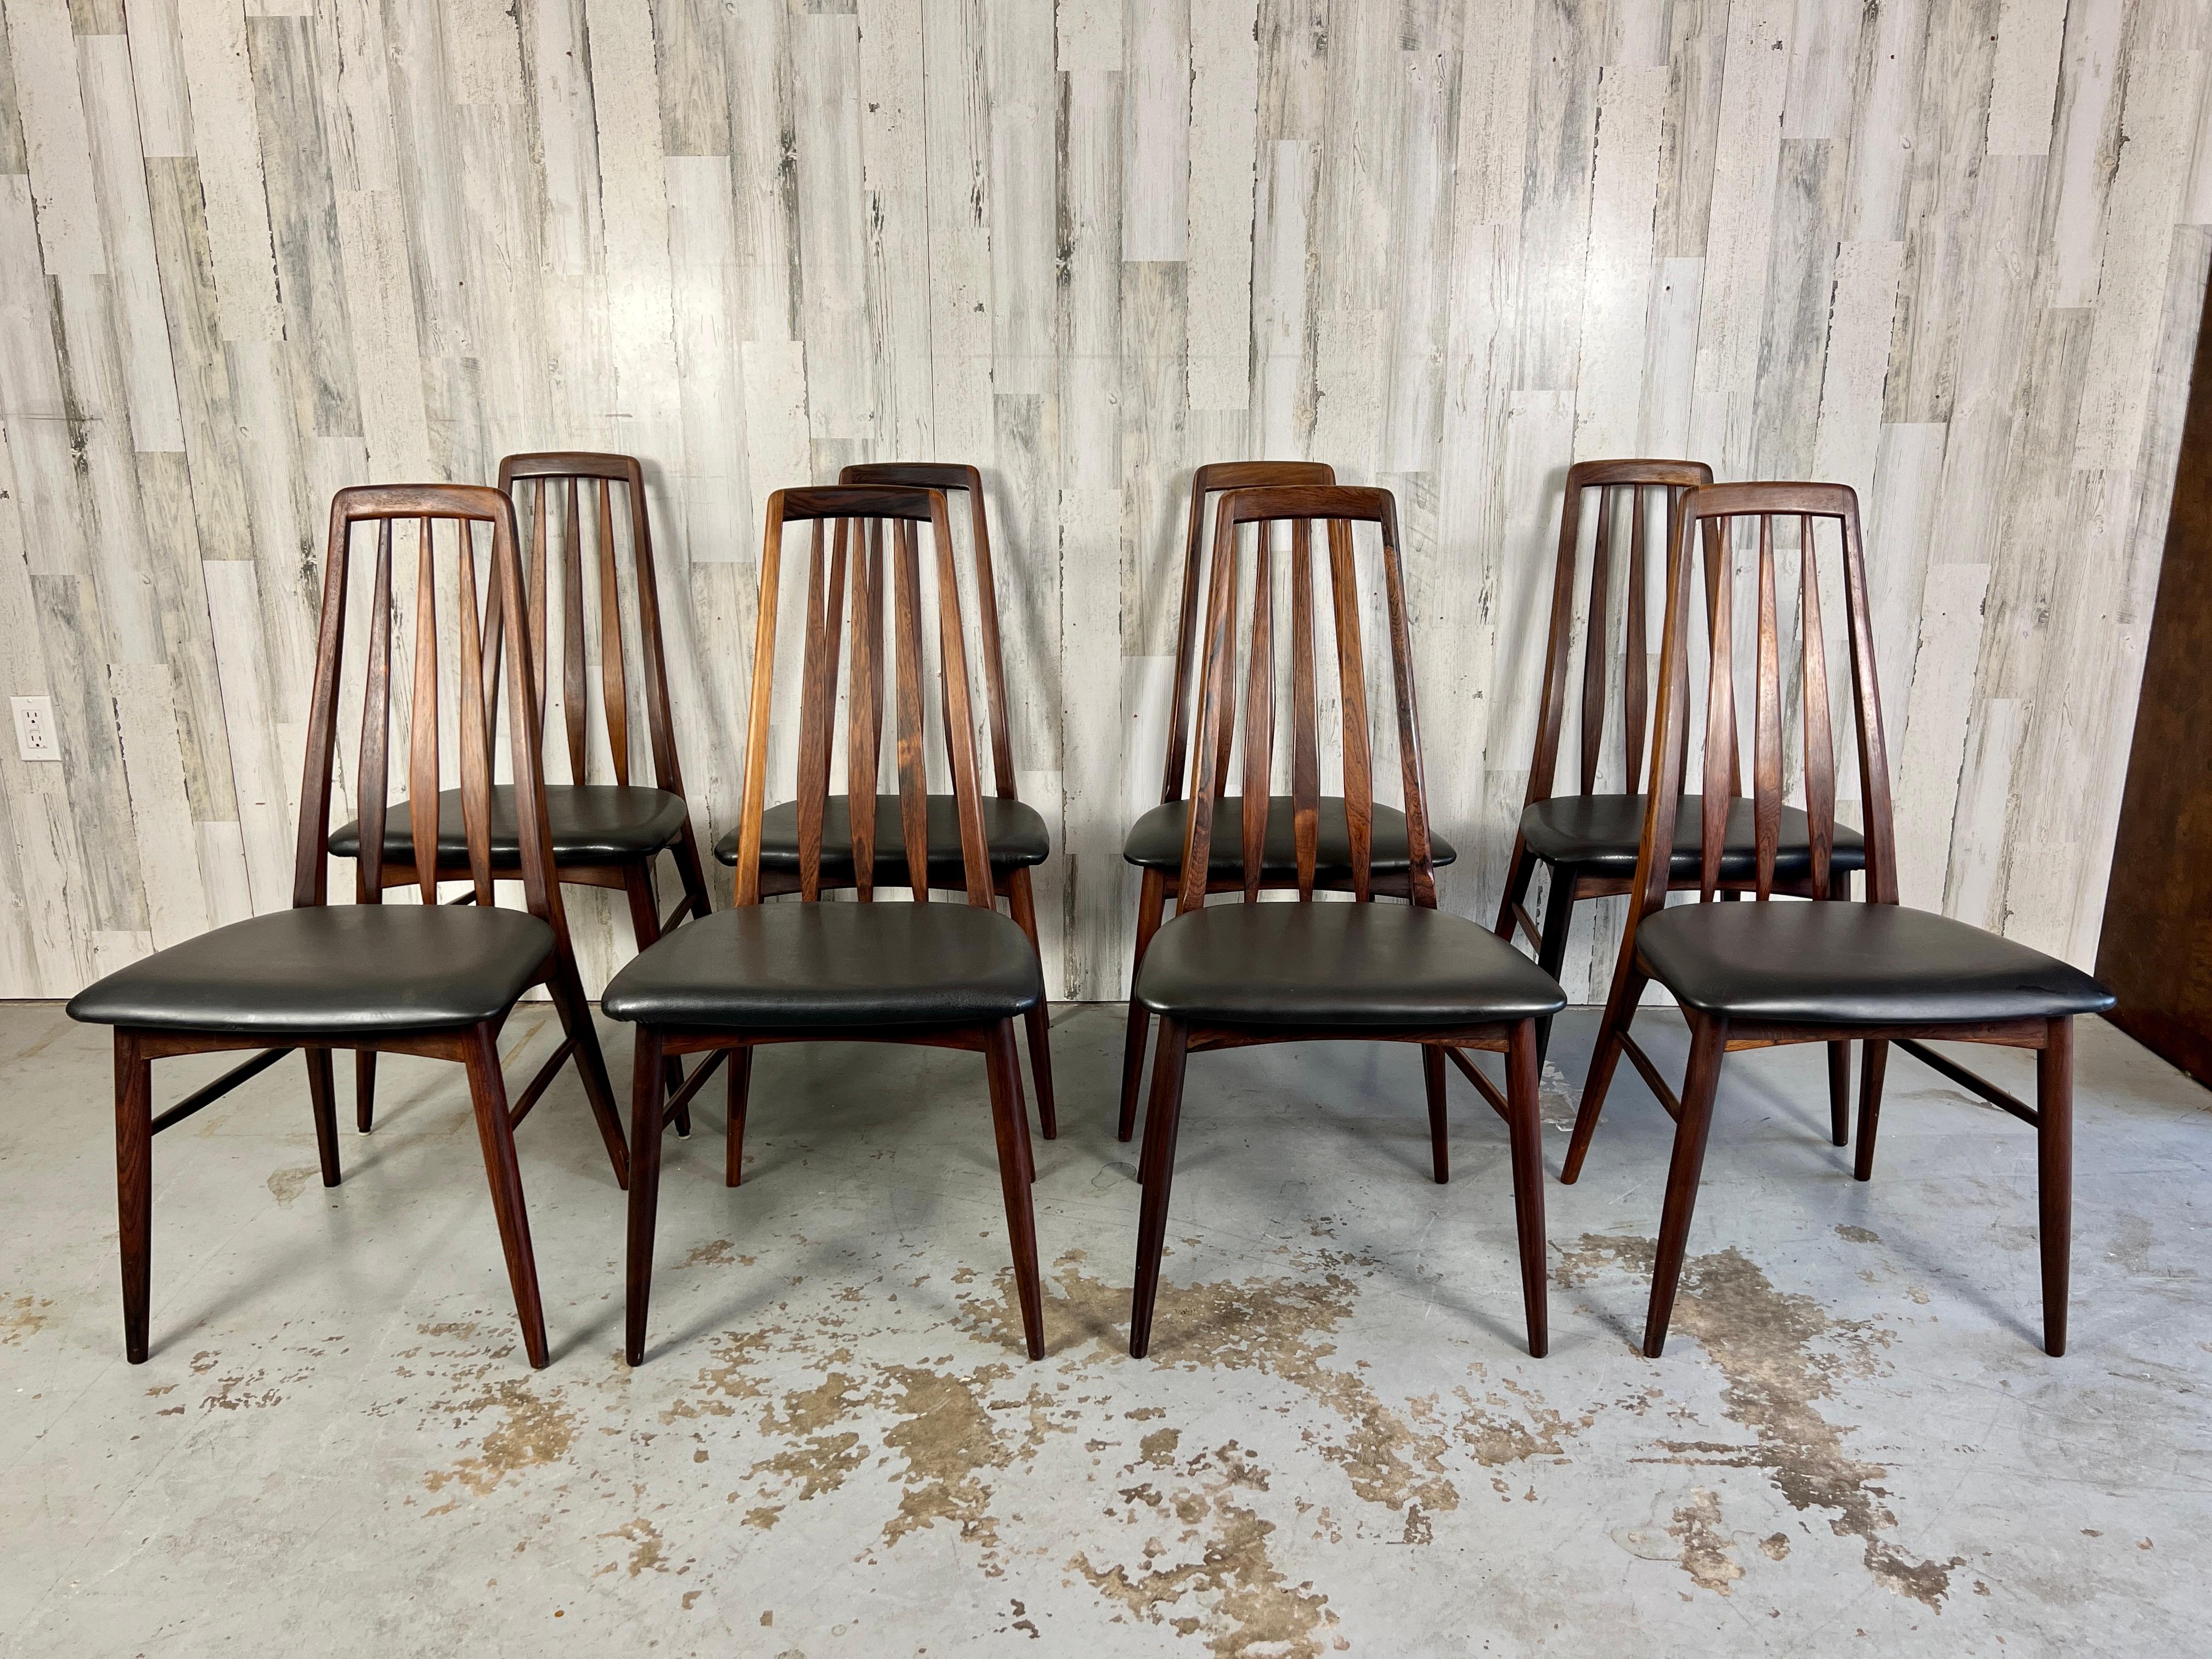 Rare set of eight solid rosewood dining chairs designed by Niels Korfoed The Eva chair set is comprised of 8 side chairs some have newer vinyl seats but match well. 8 side chairs chairs measure 20.5/8s deep by 20.3/8s wide by 37.5/8s high.